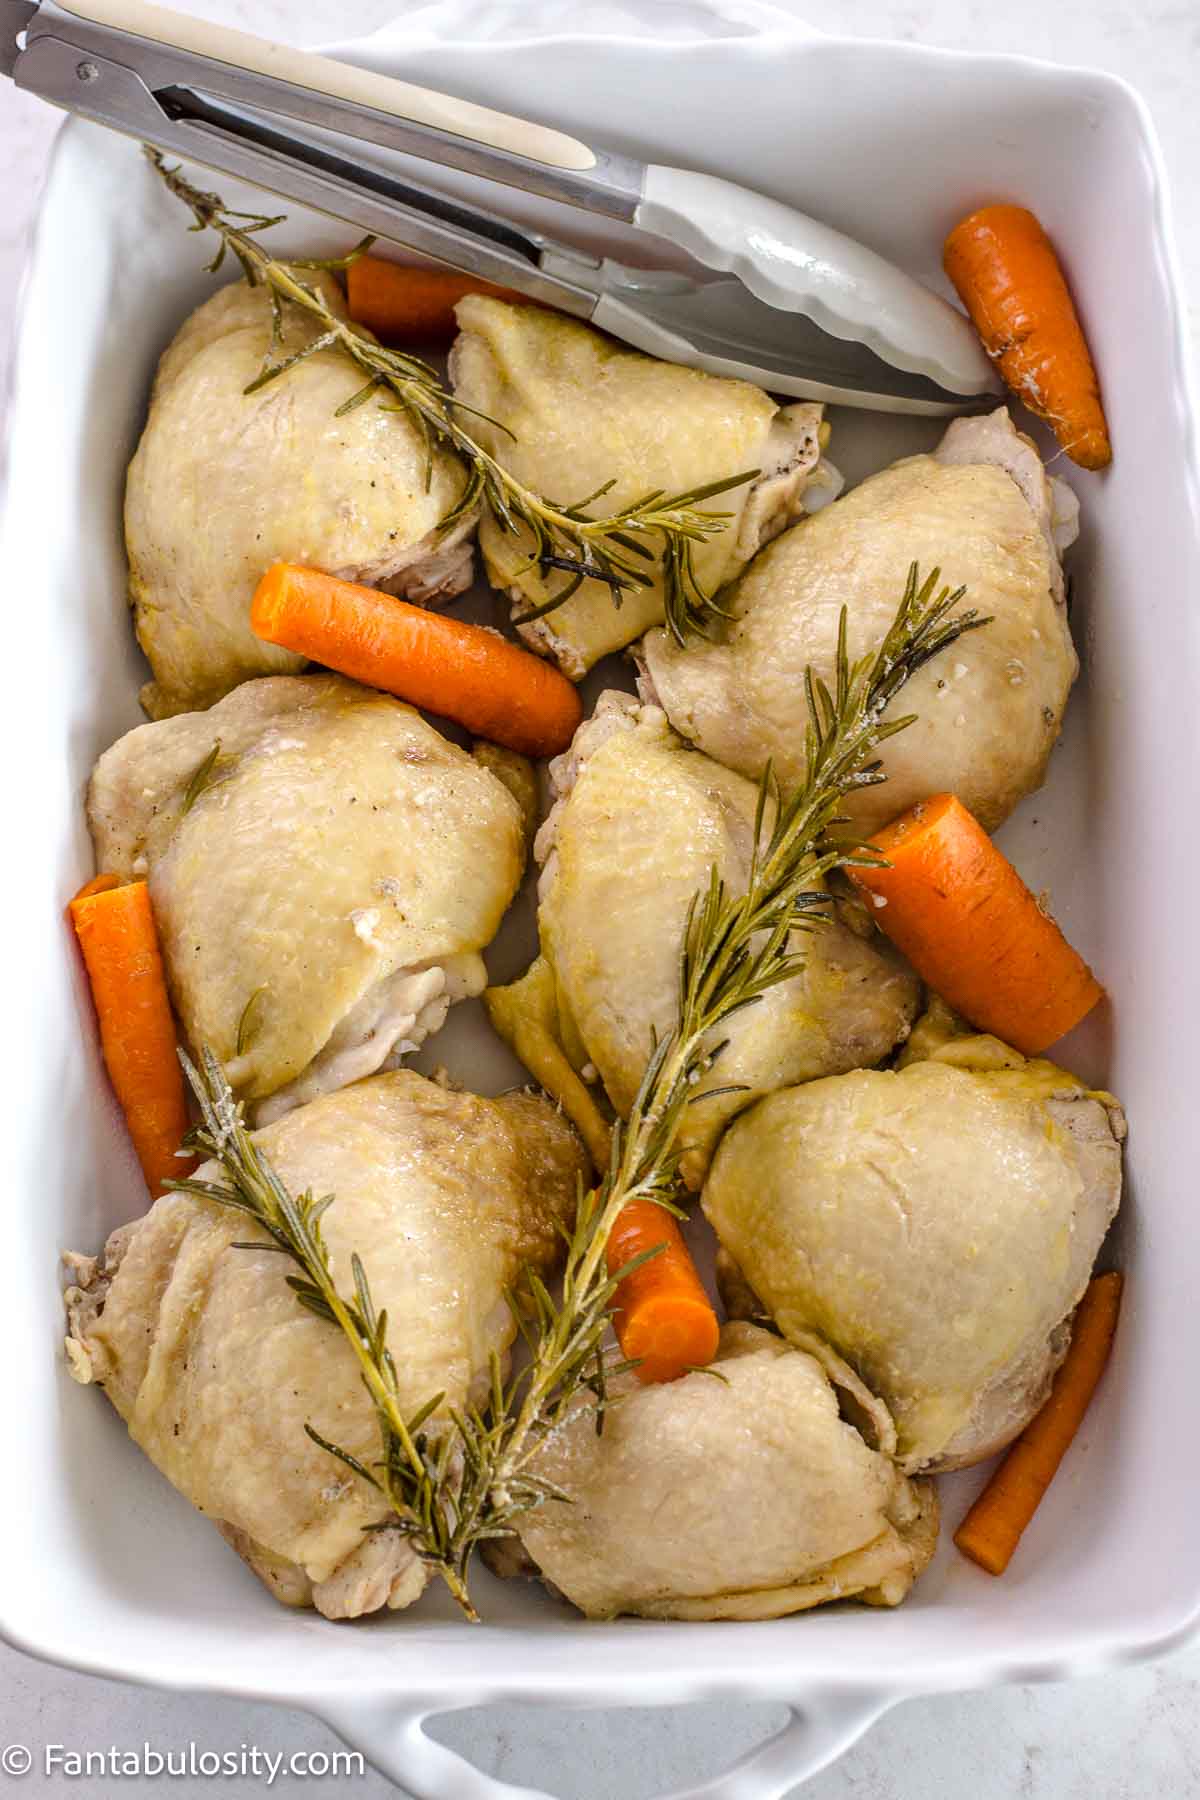 Boiled chicken thighs in baking dish, with carrots and rosemary.